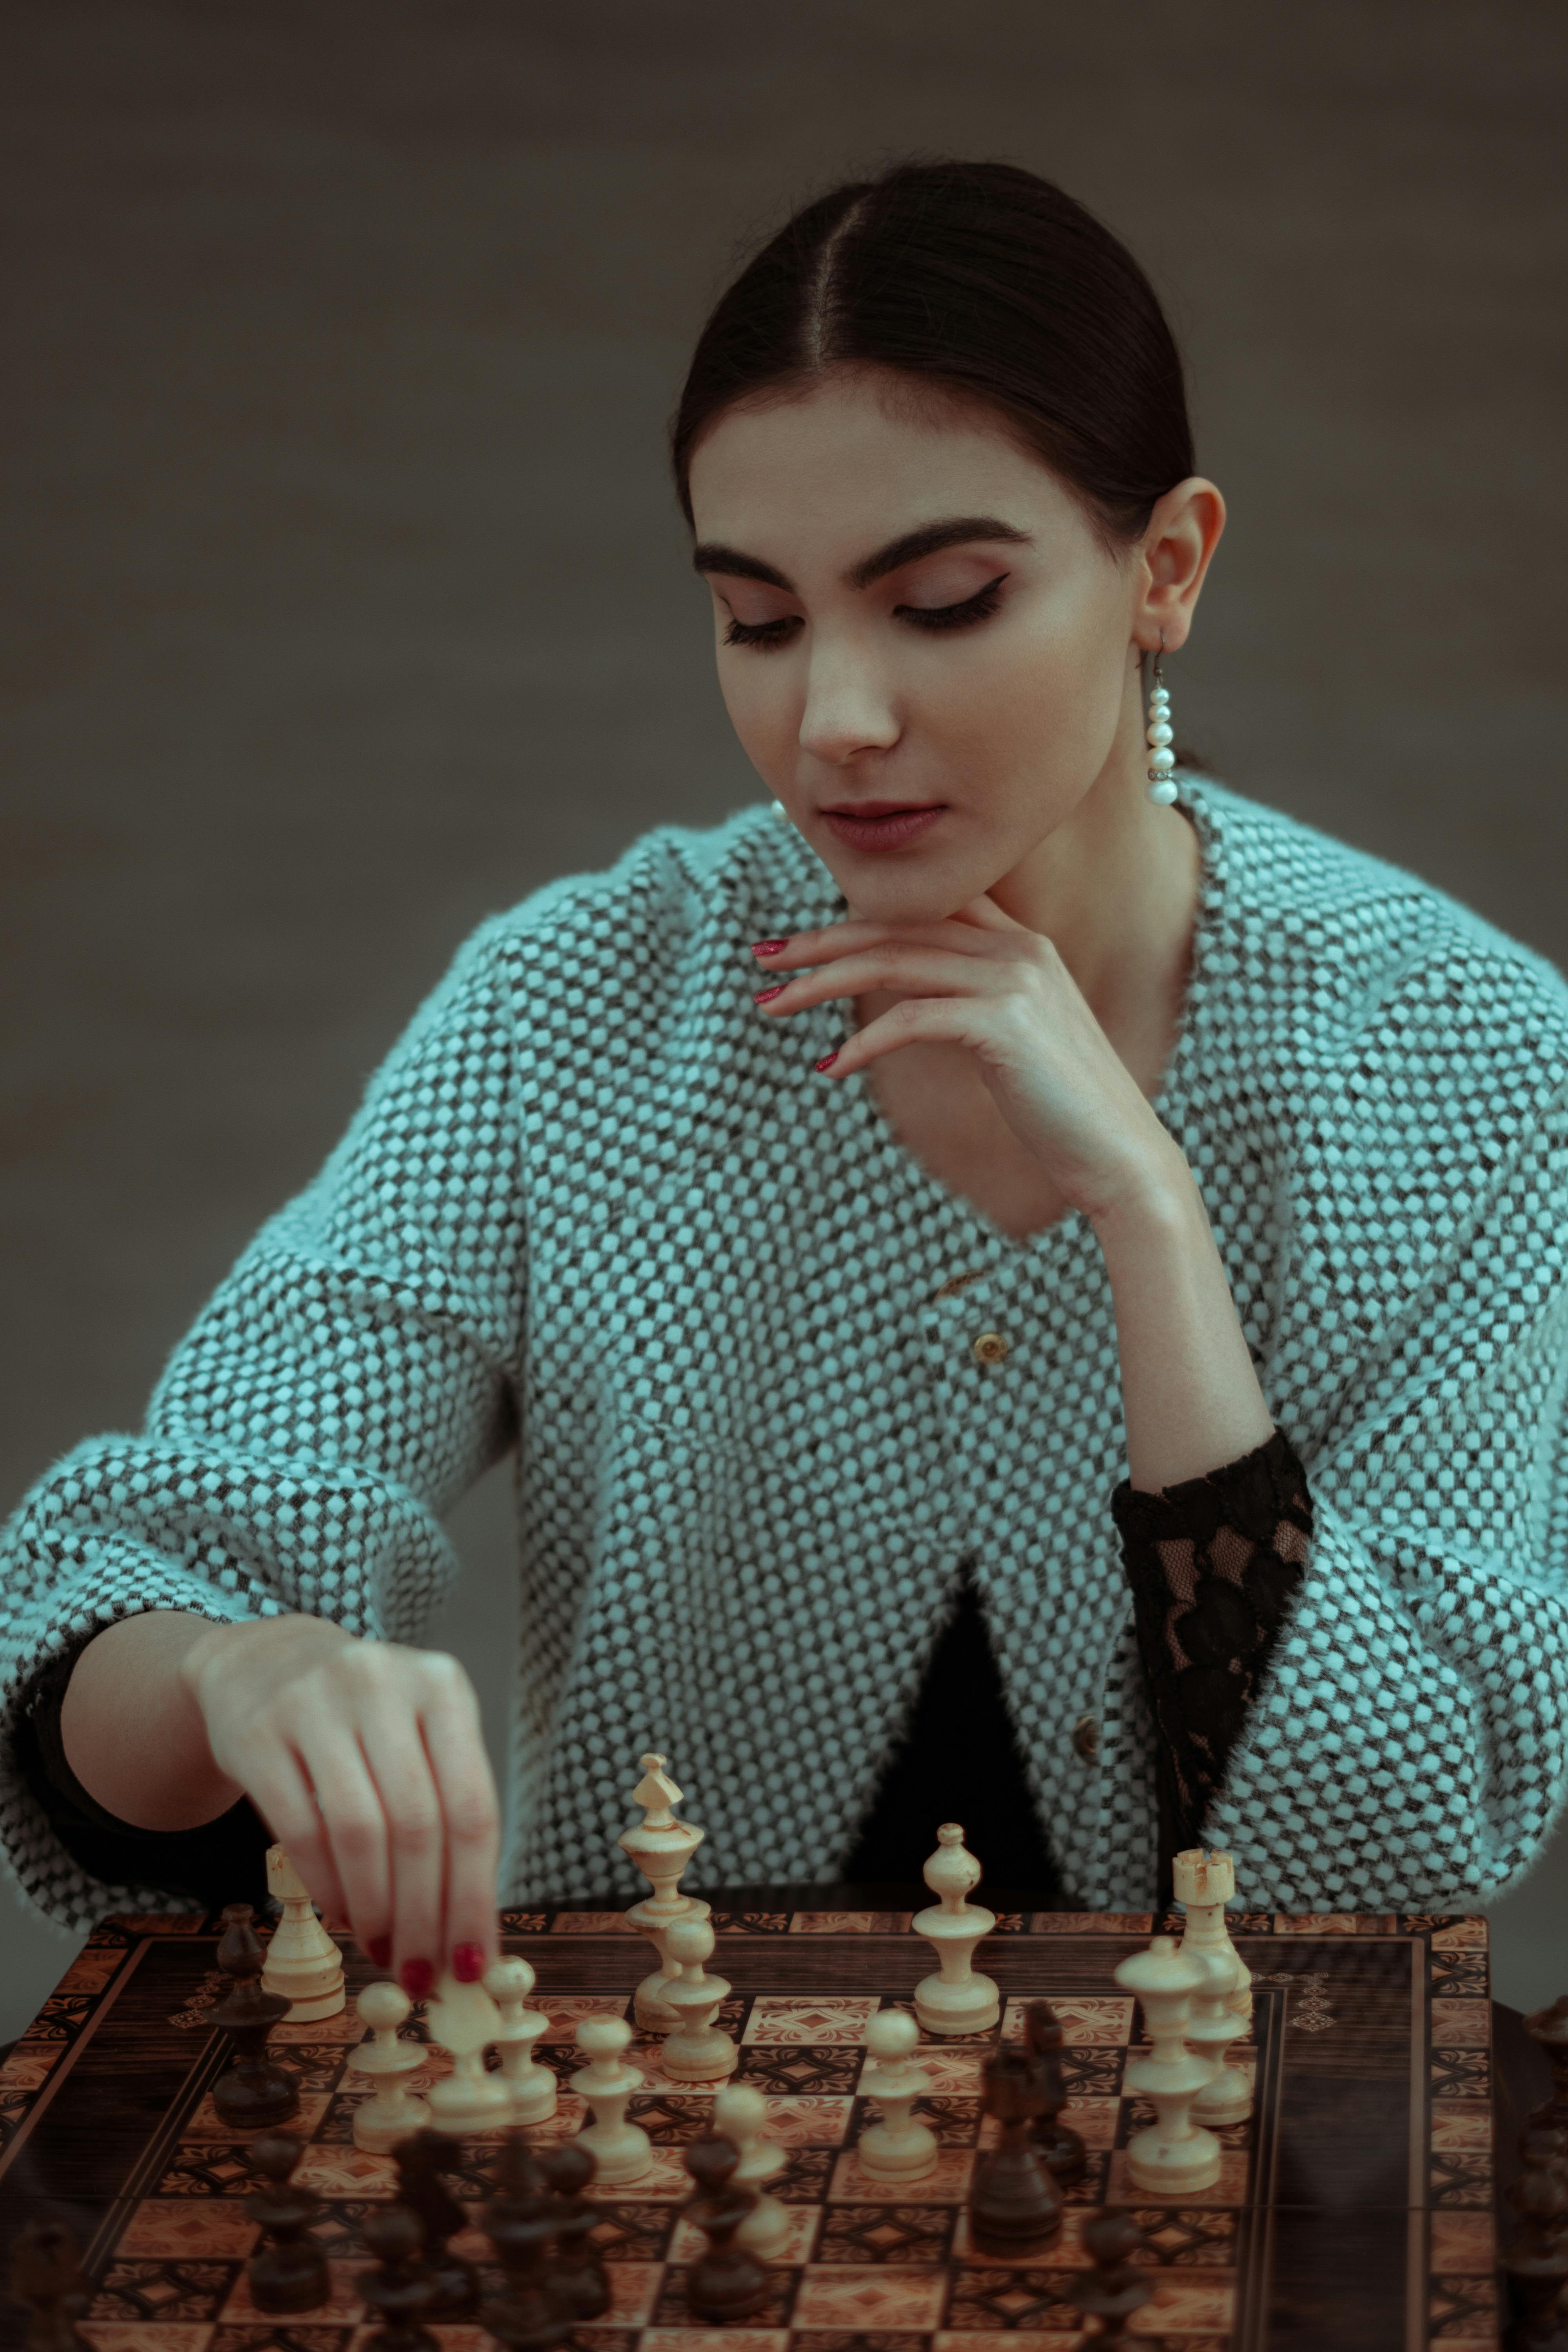 woman studying the next chess move, Stock image